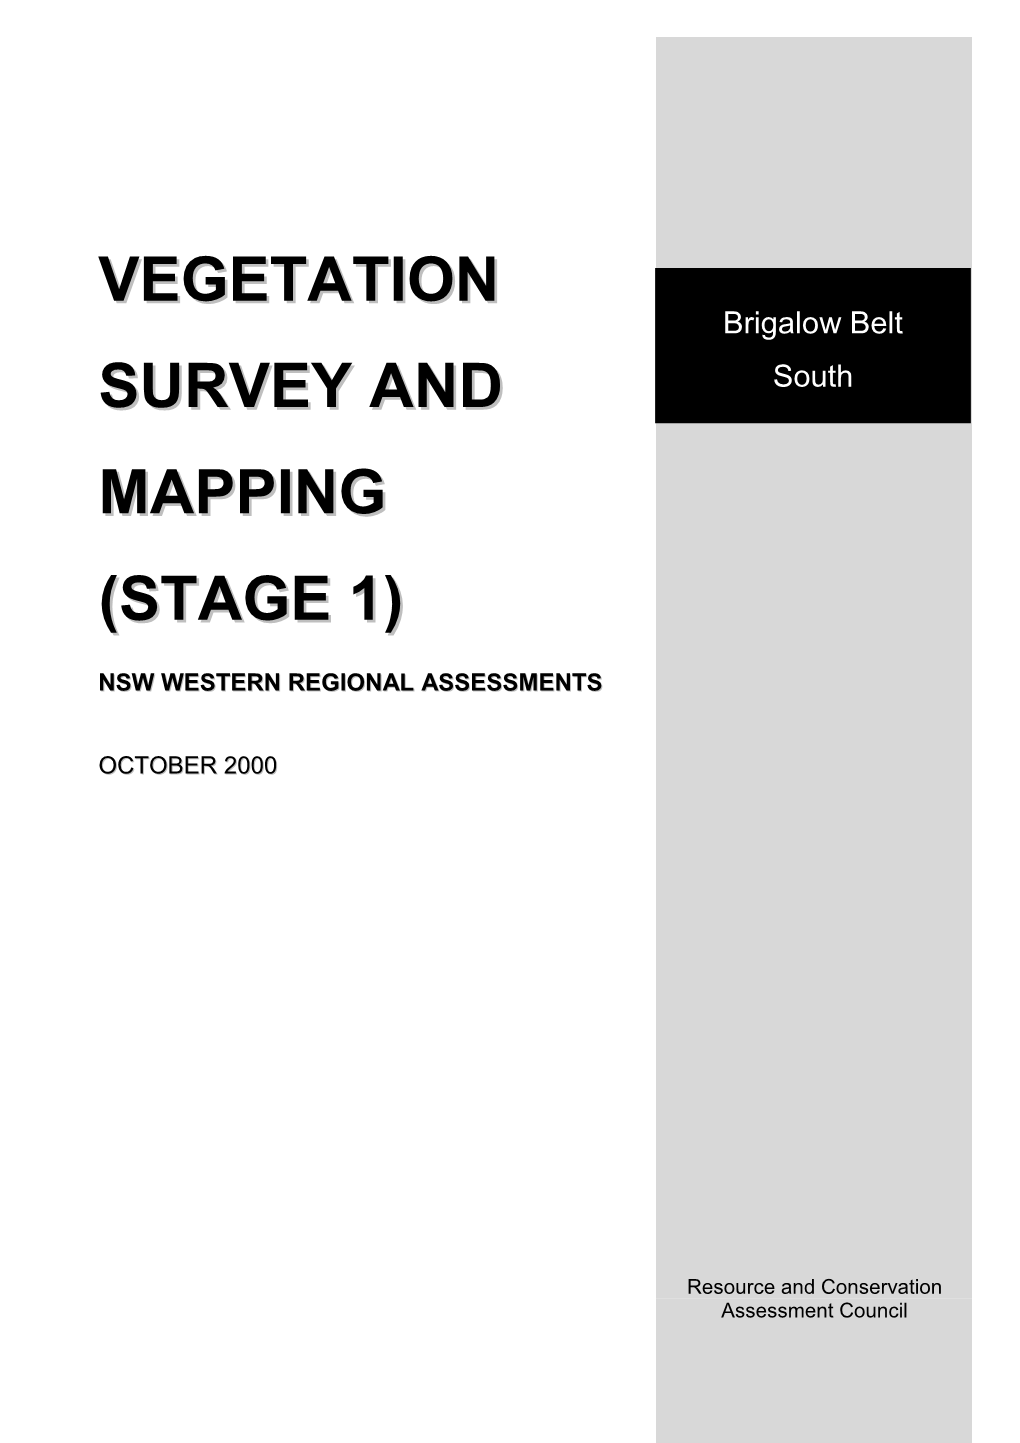 Vegetation Survey and Mapping (Stage 1)